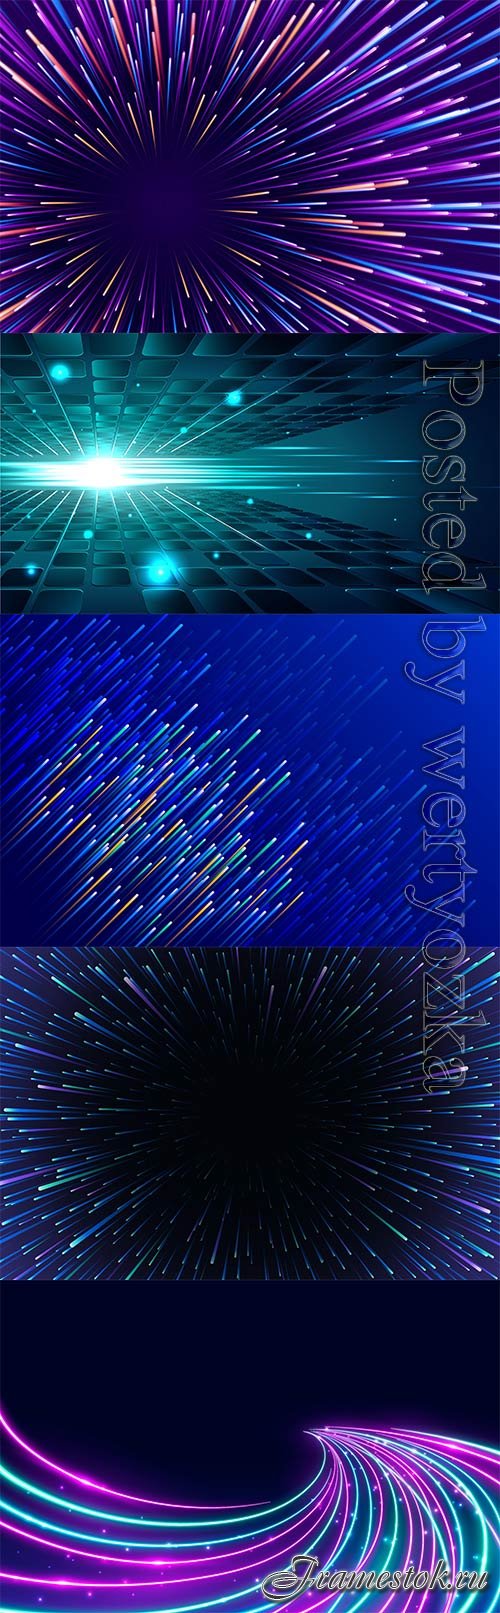 Abstract backgrounds with shining elements in vector